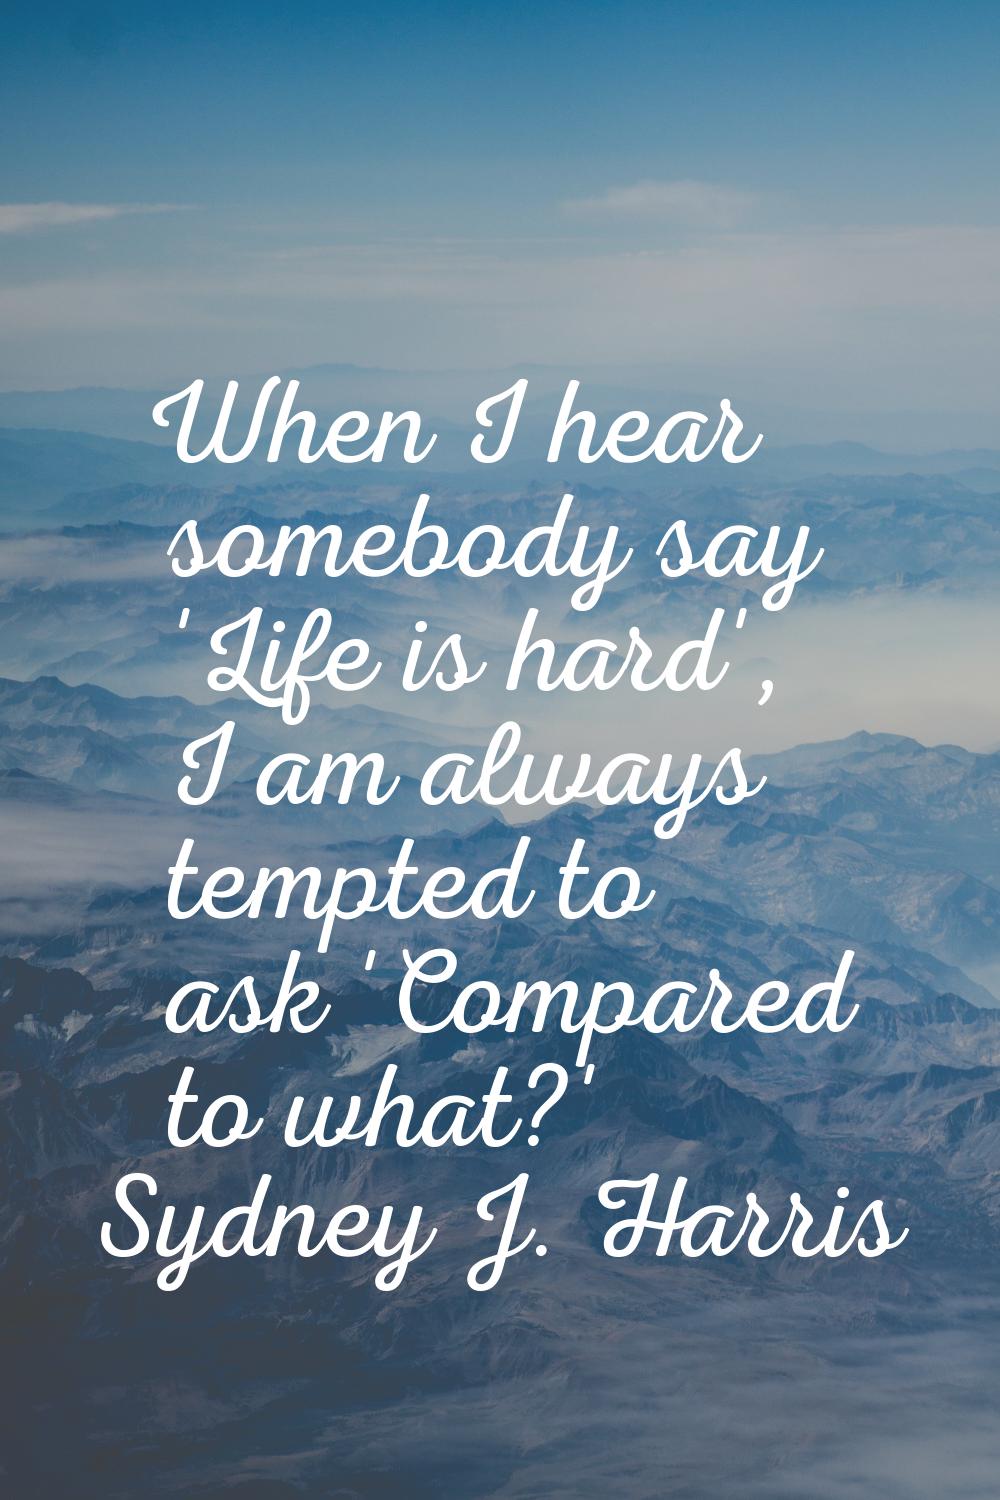 When I hear somebody say 'Life is hard', I am always tempted to ask 'Compared to what?'